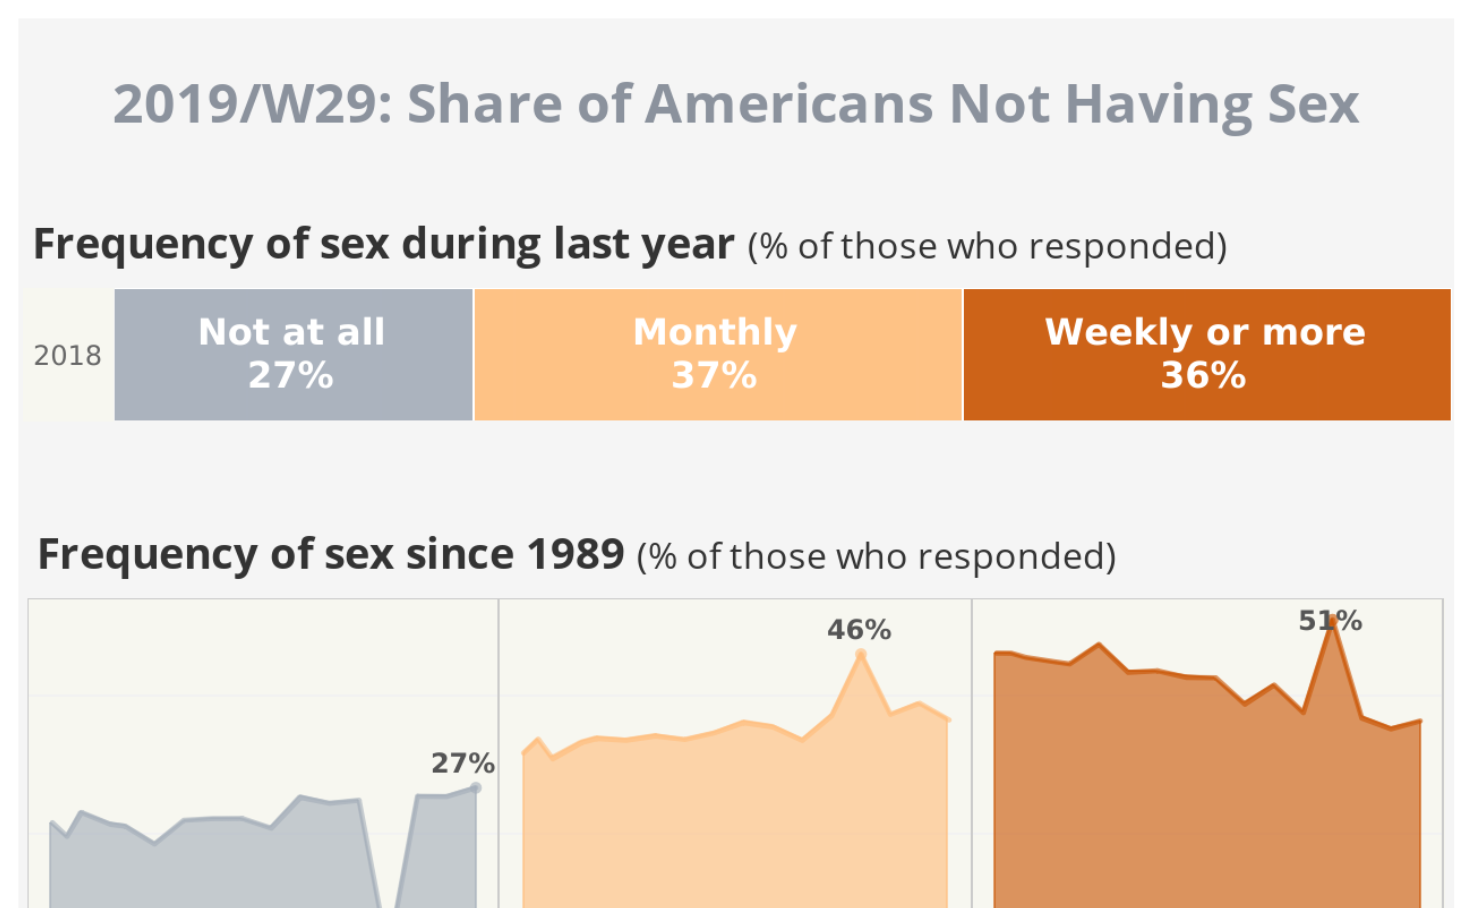 Mm 2019w29 Share Of Americans Not Having Sex Alina Cros Tableau Public